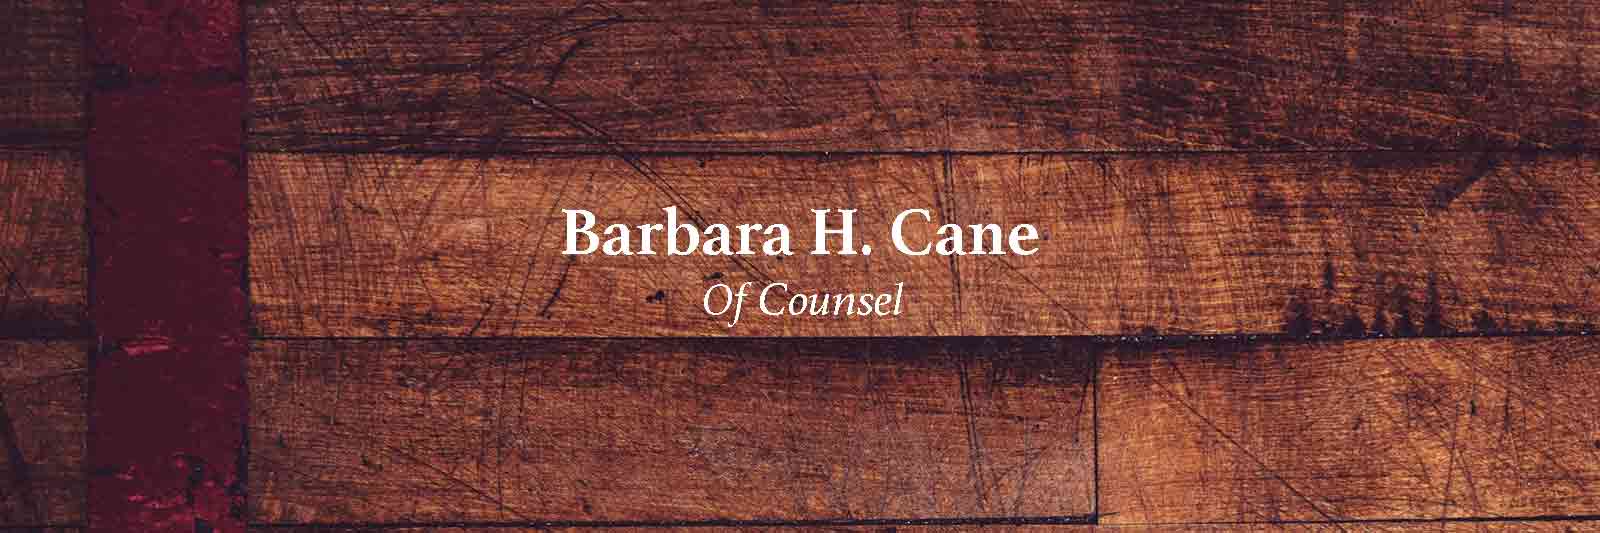 Barbara H. Cane, Of Counsel